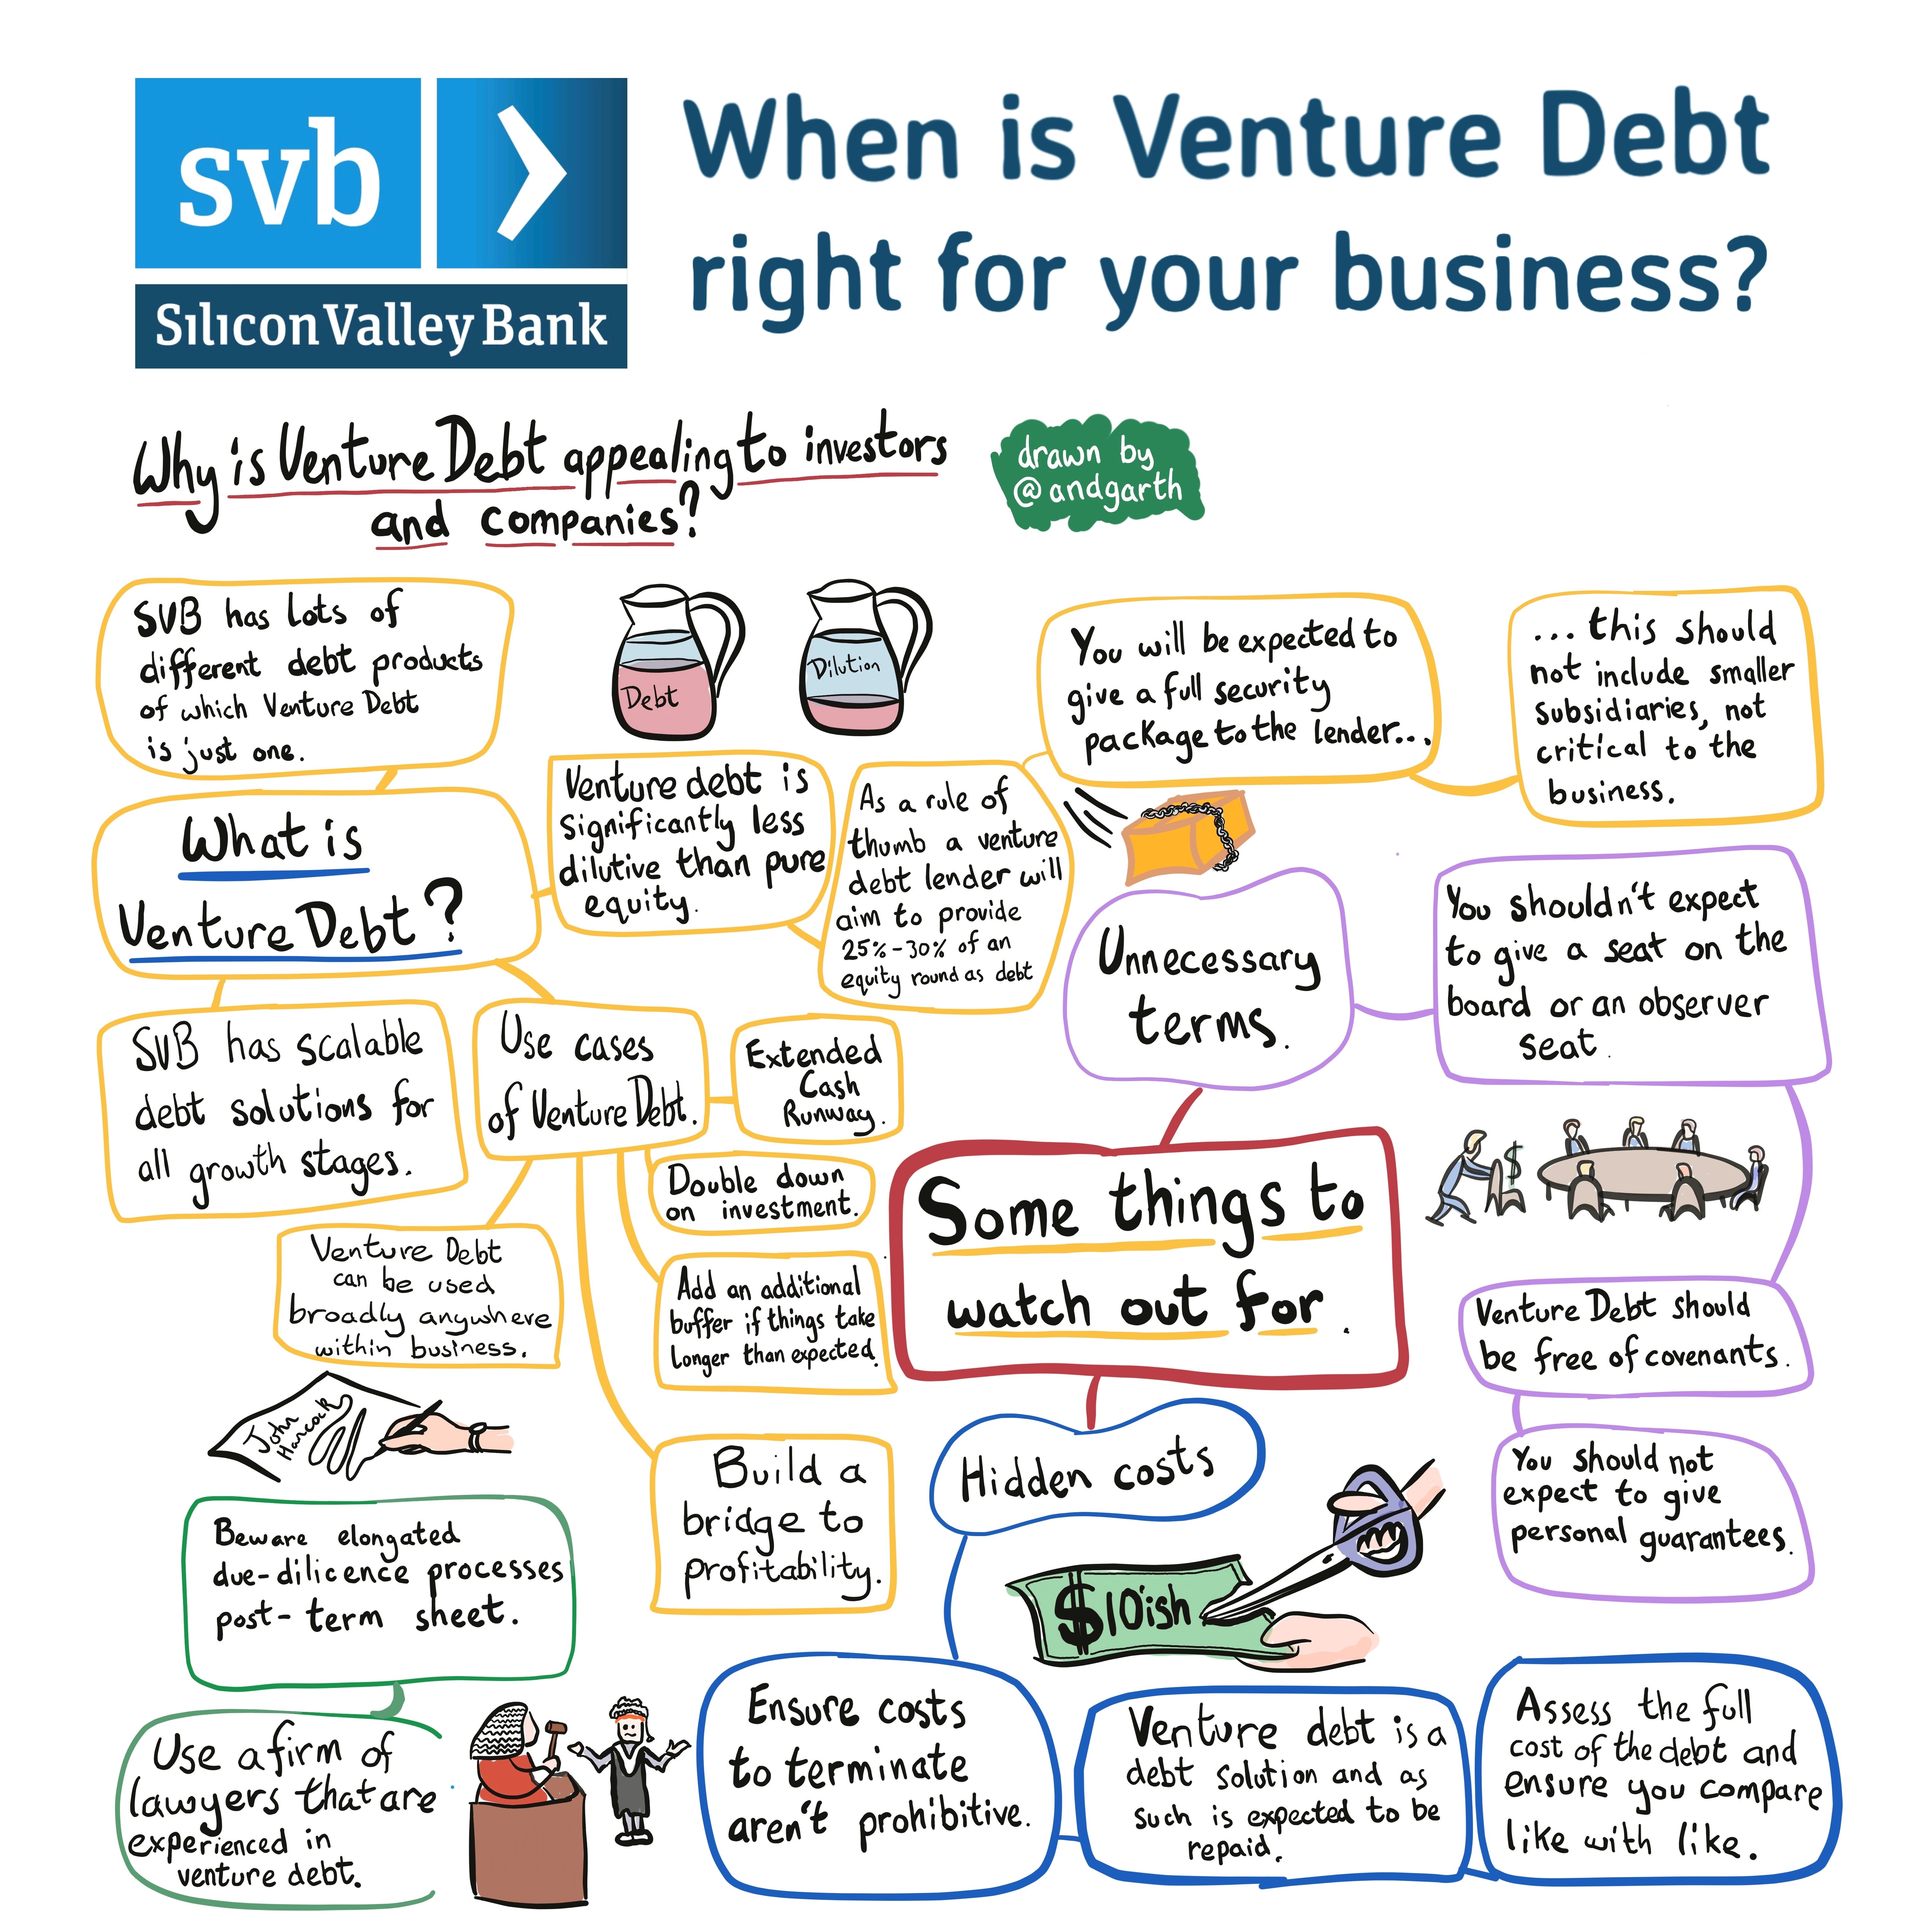 What is the typical tenure for venture debt?